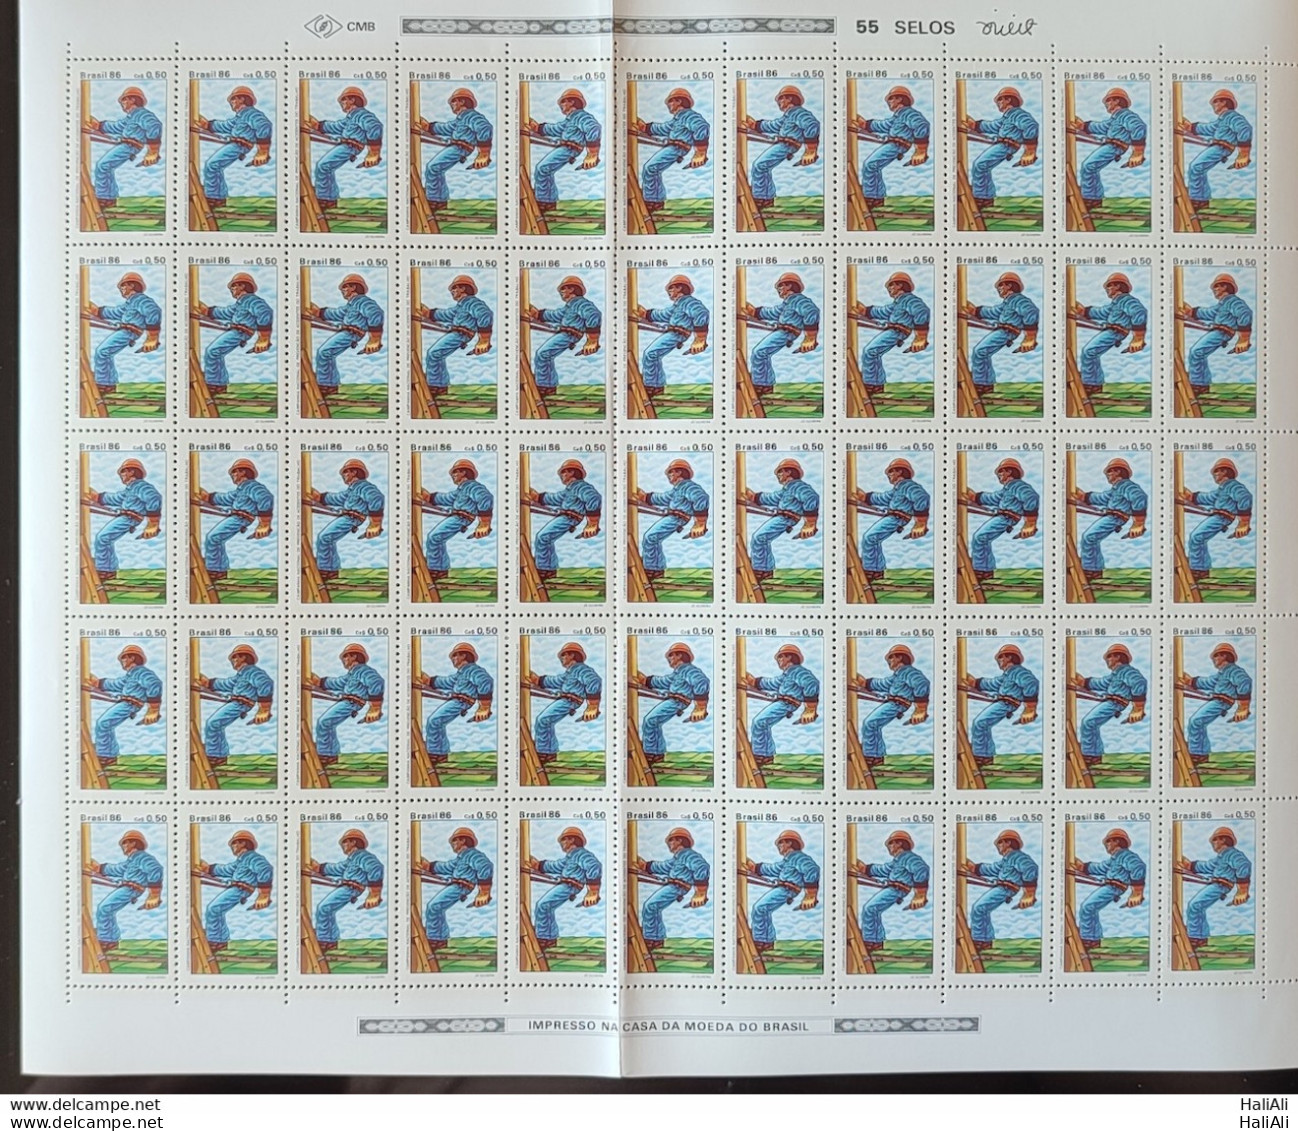 C 1516 Brazil Stamp Prevention Of Work Accidents Health Safety 1986 Sheet.jpg - Nuovi